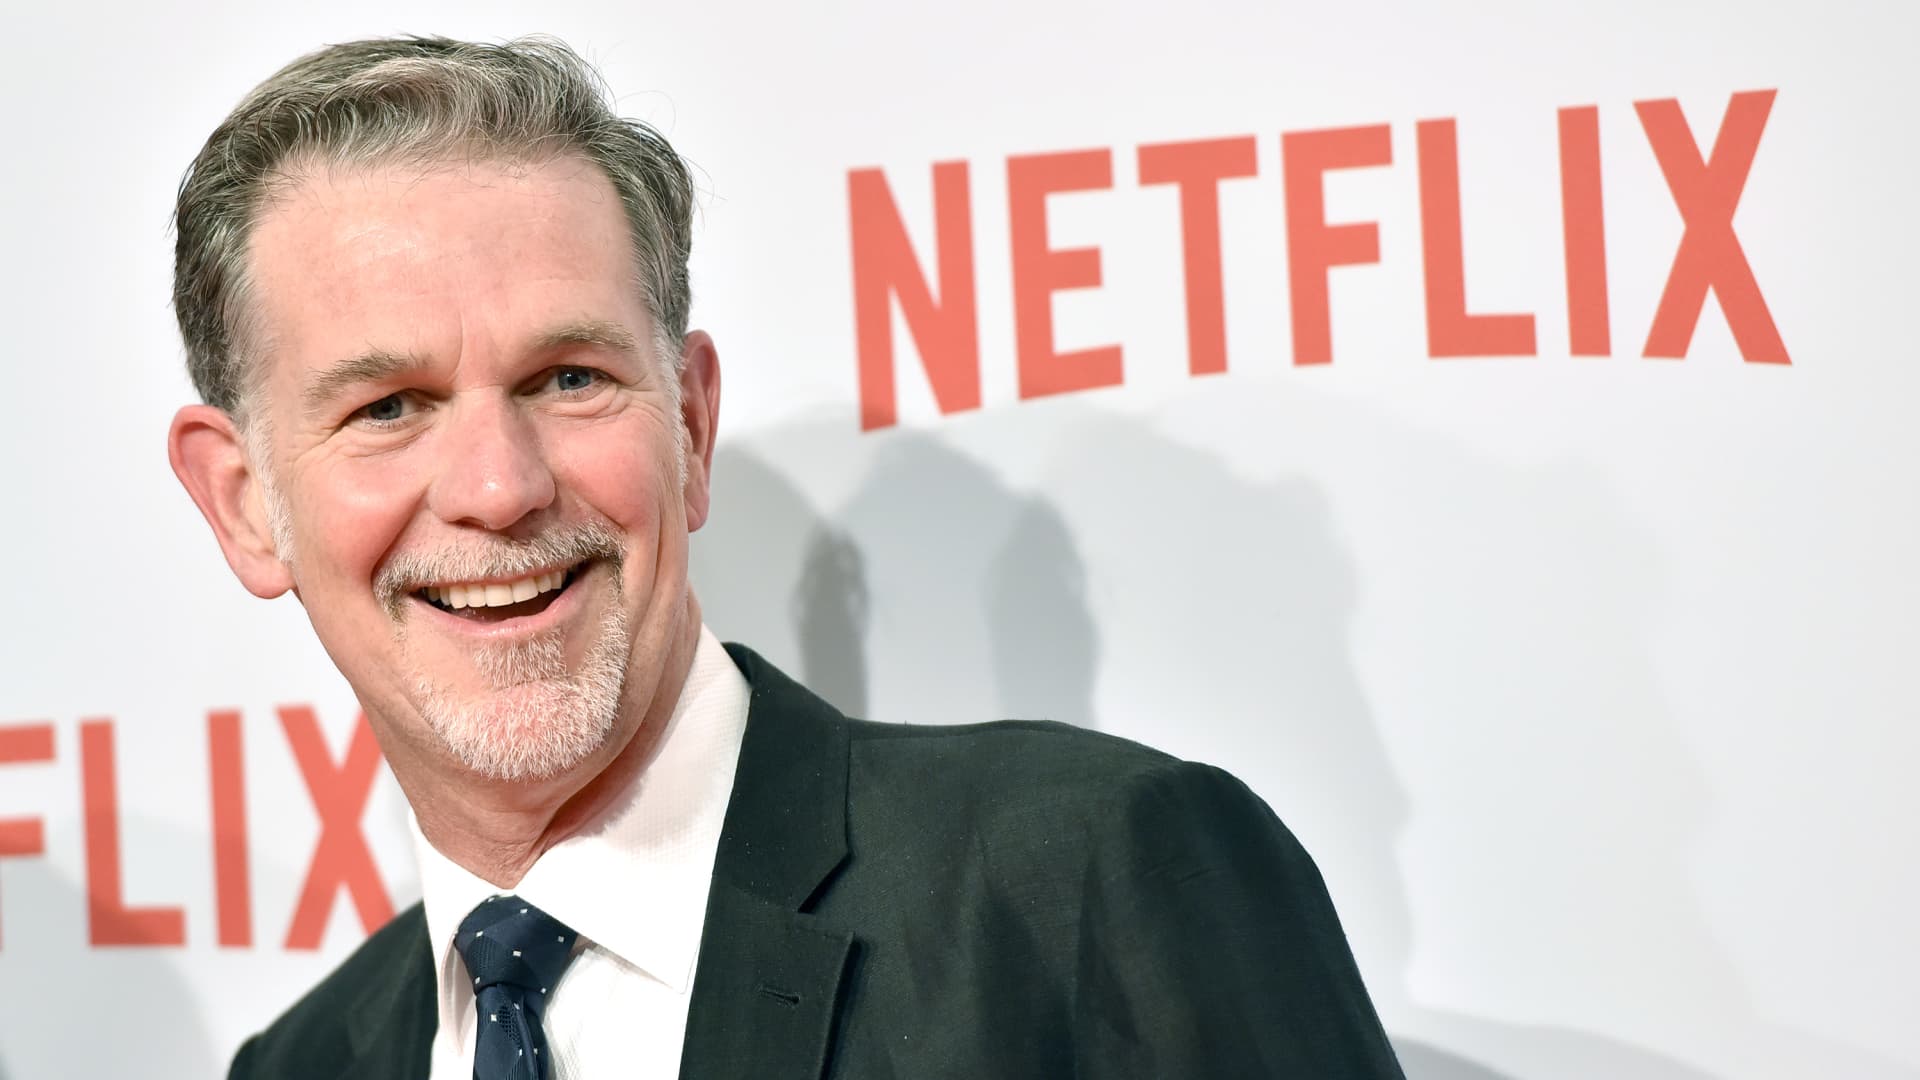 Netflix's earnings results mark pivot point for streaming giant, for better or worse